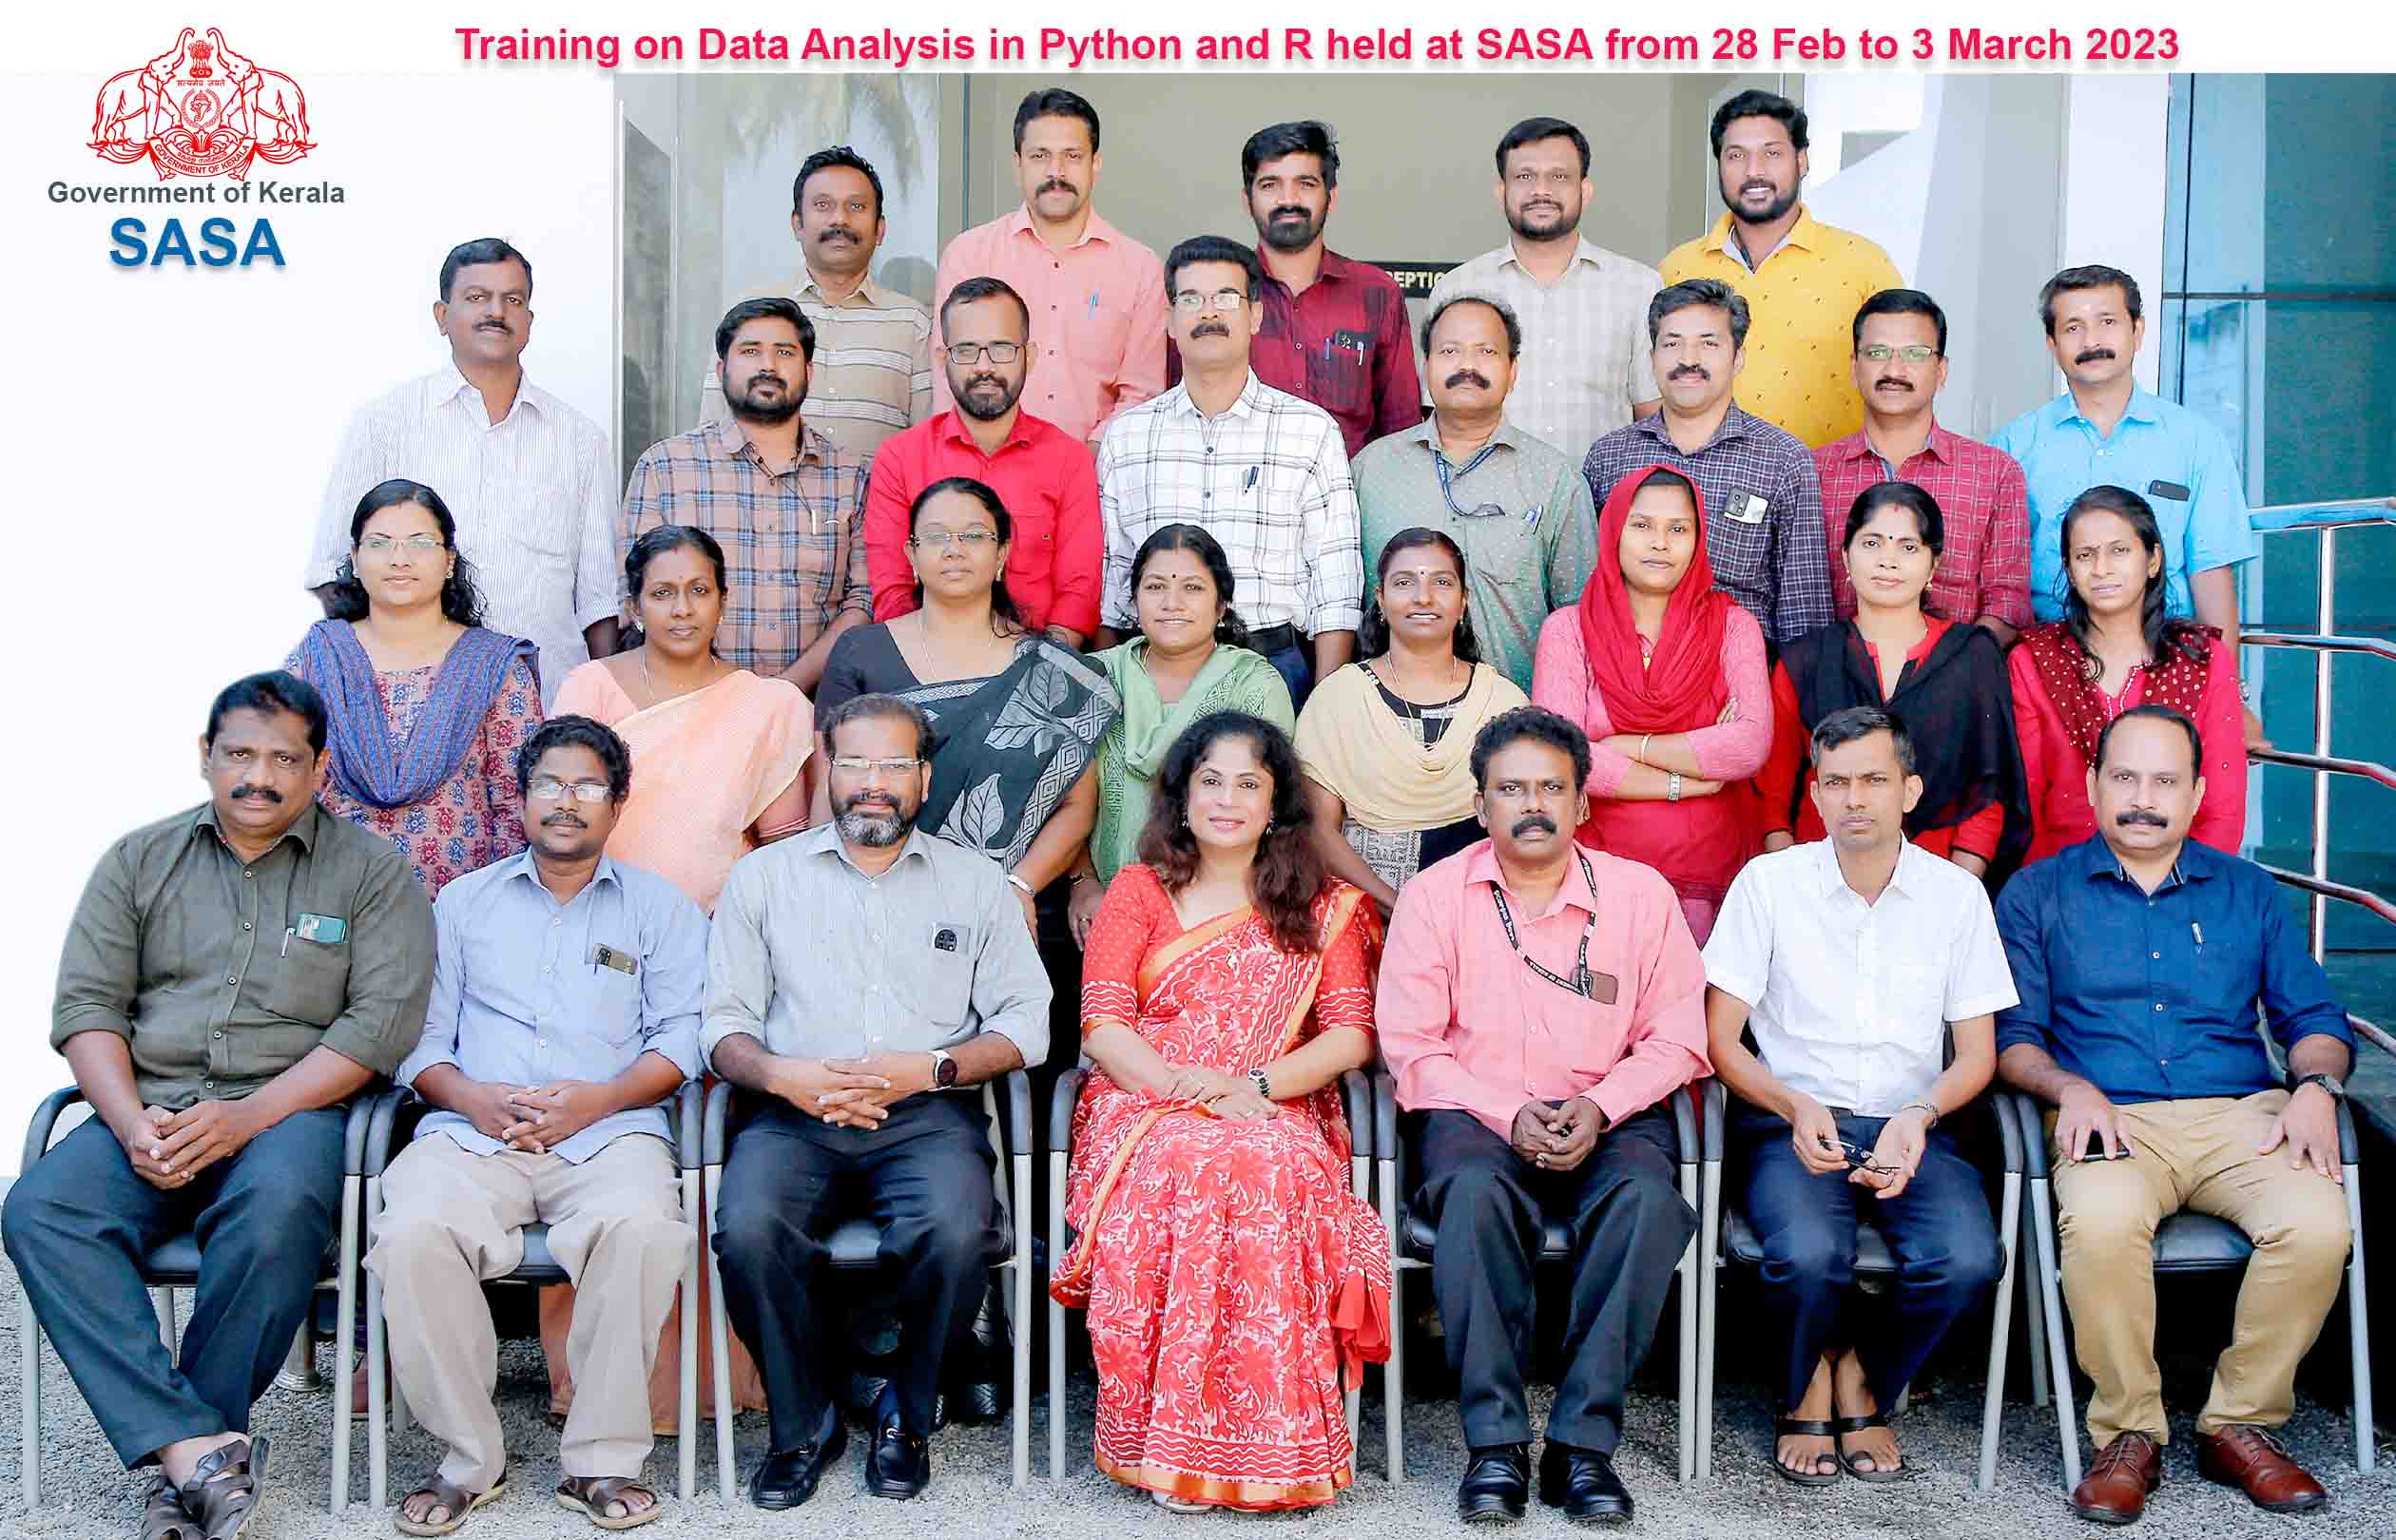 Training on Data Analysis in R & Python held at SASA from 28-2 to 3-3 2023